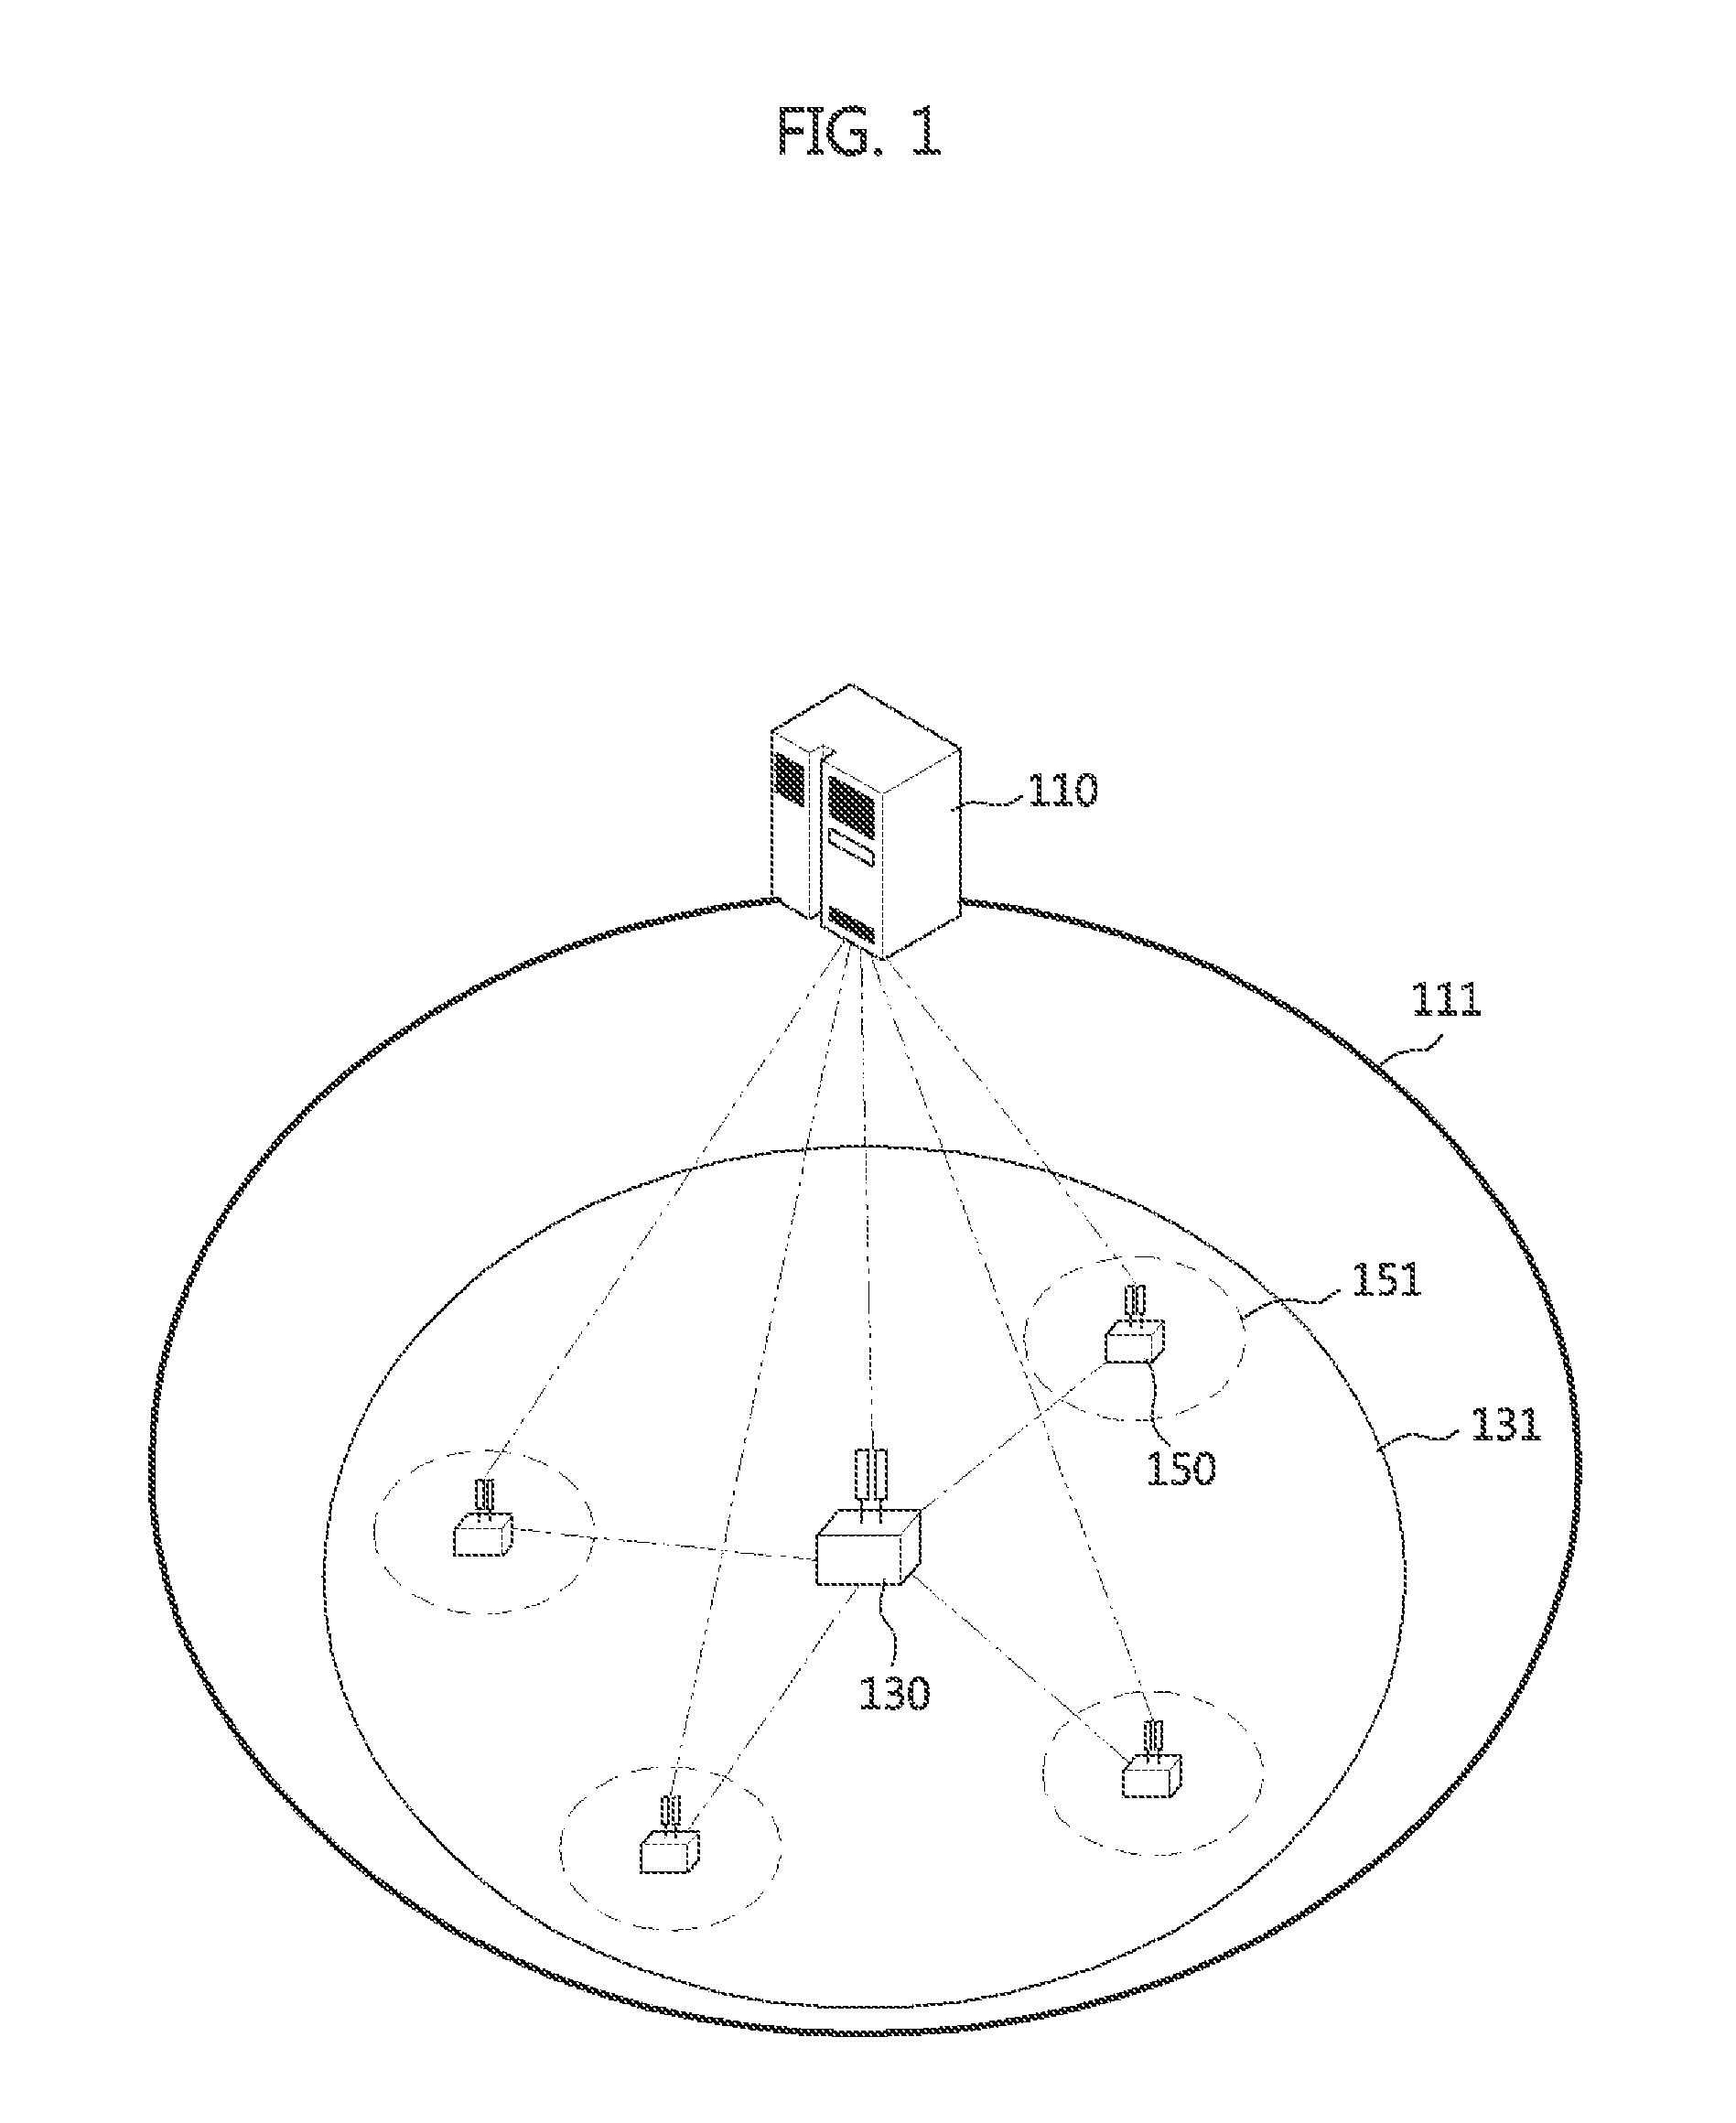 Wireless communication system using multiple transmission and reception points